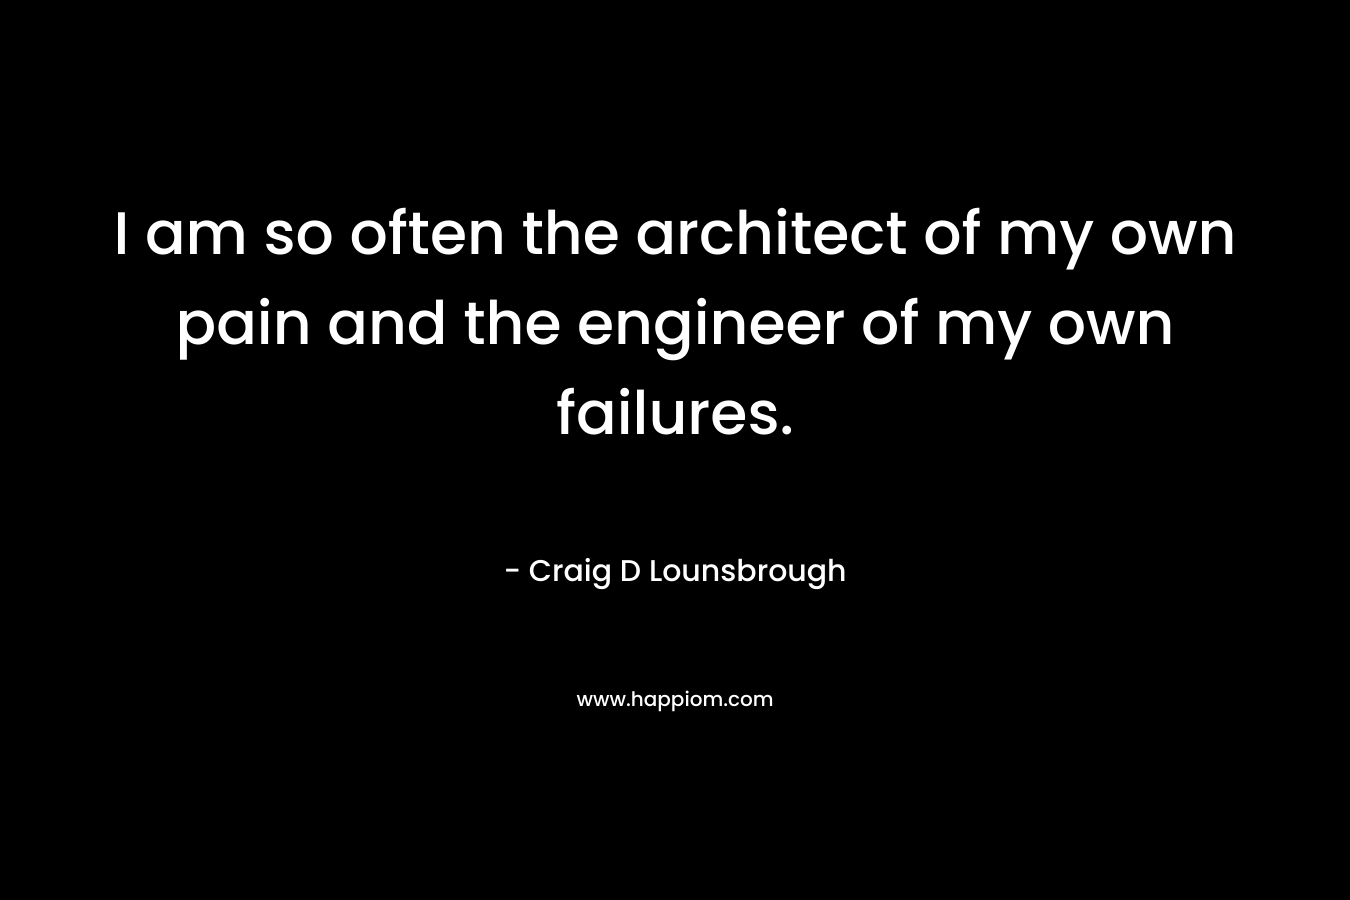 I am so often the architect of my own pain and the engineer of my own failures.